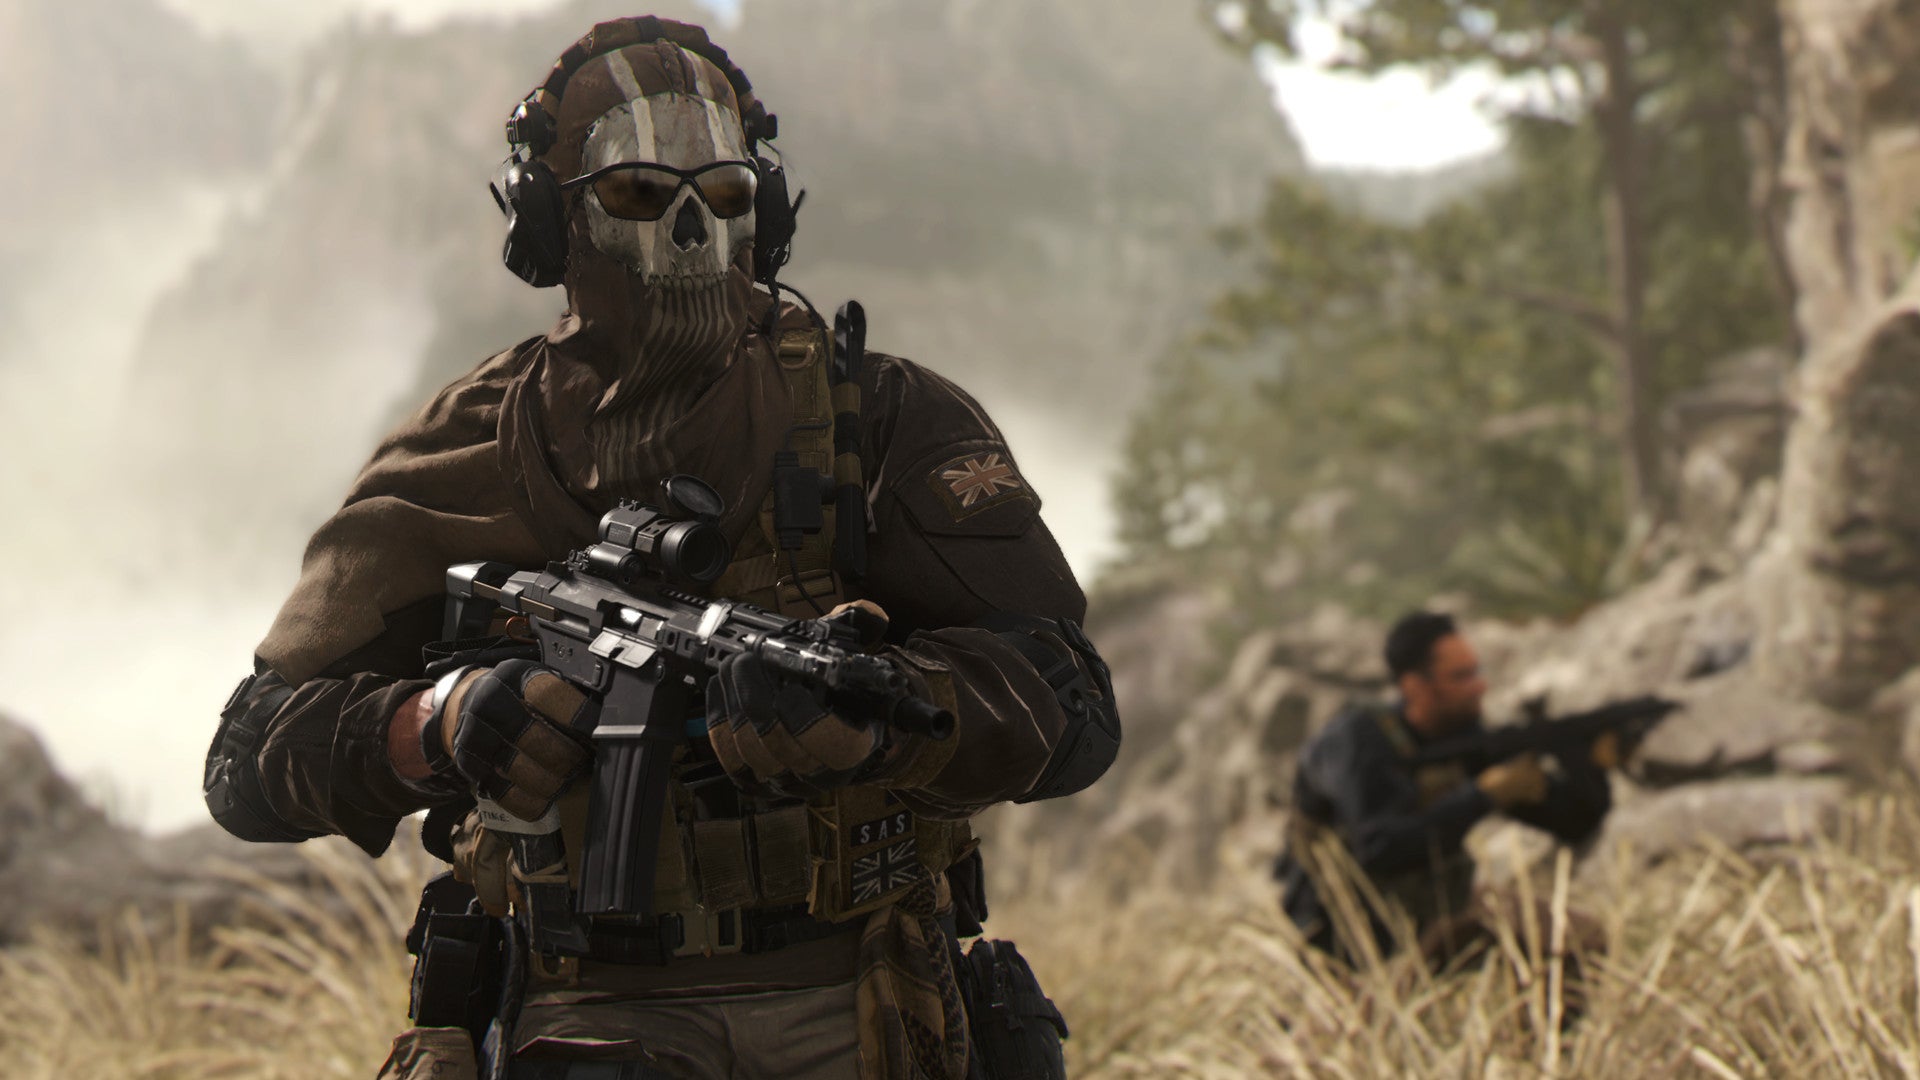 Ghost from Call Of Duty: Modern Warfare 2 stalks the plains, while a squadmate keeps an eye out behind him.